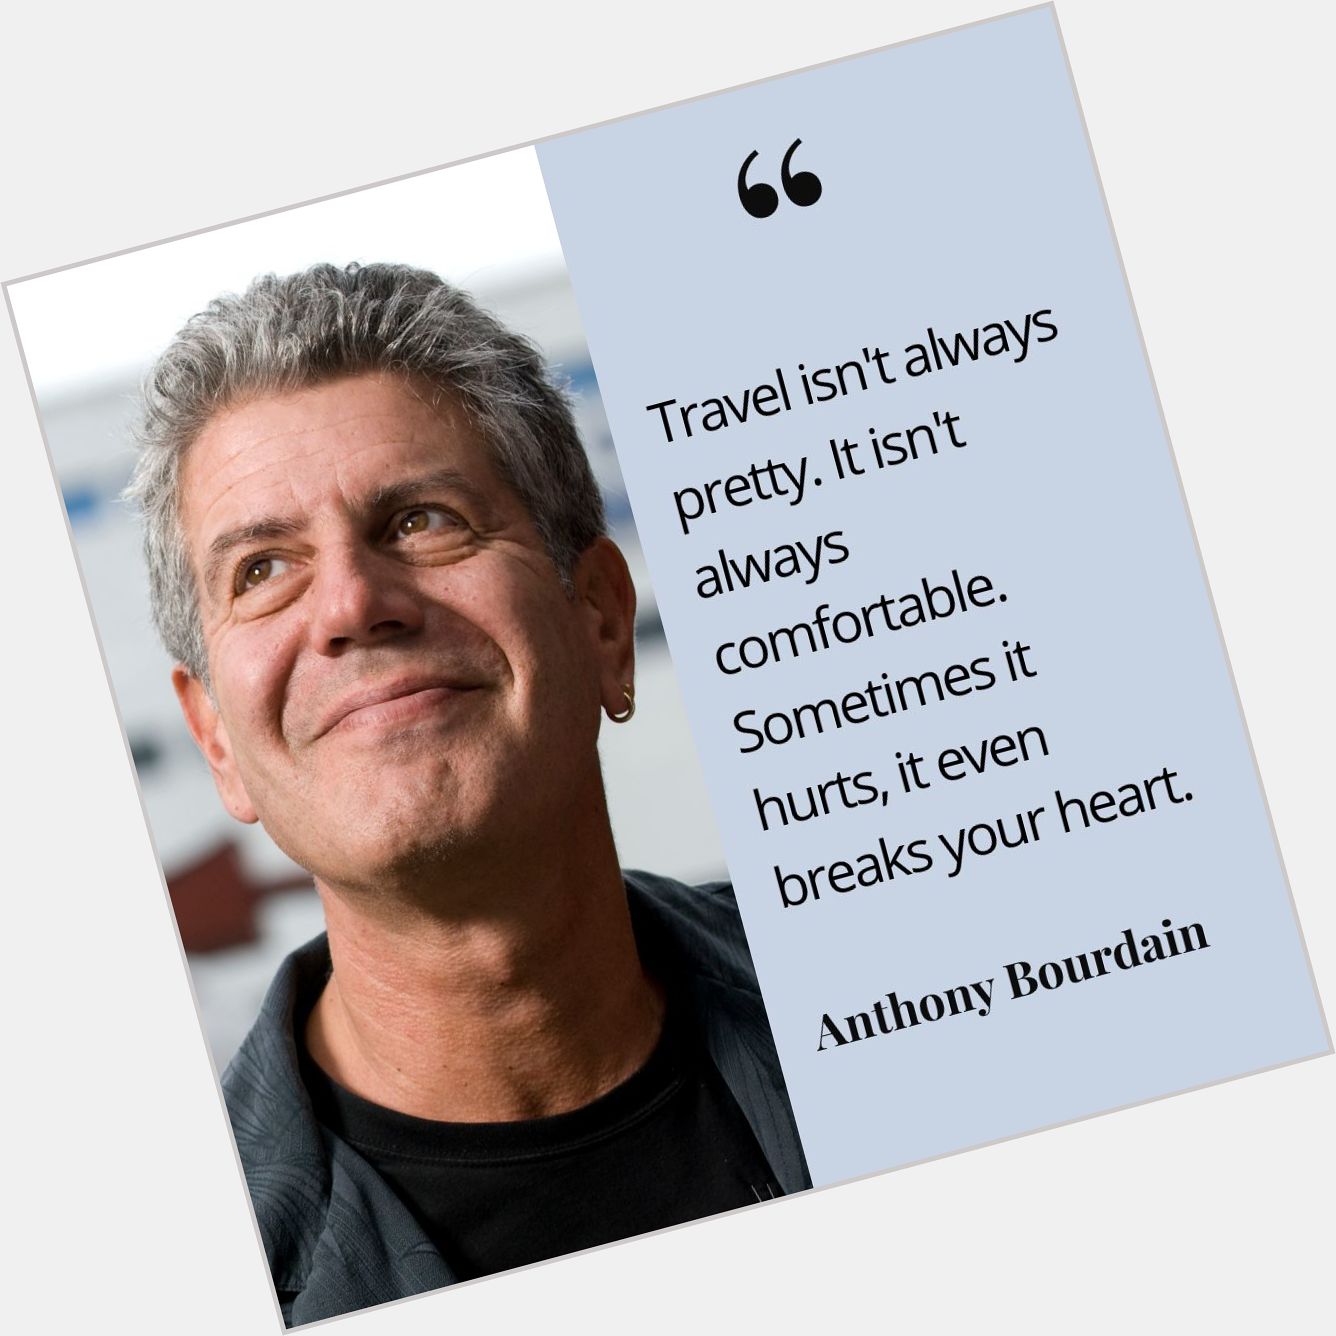 Happy birthday to the Anthony Bourdain, who would have been 65 years old today 